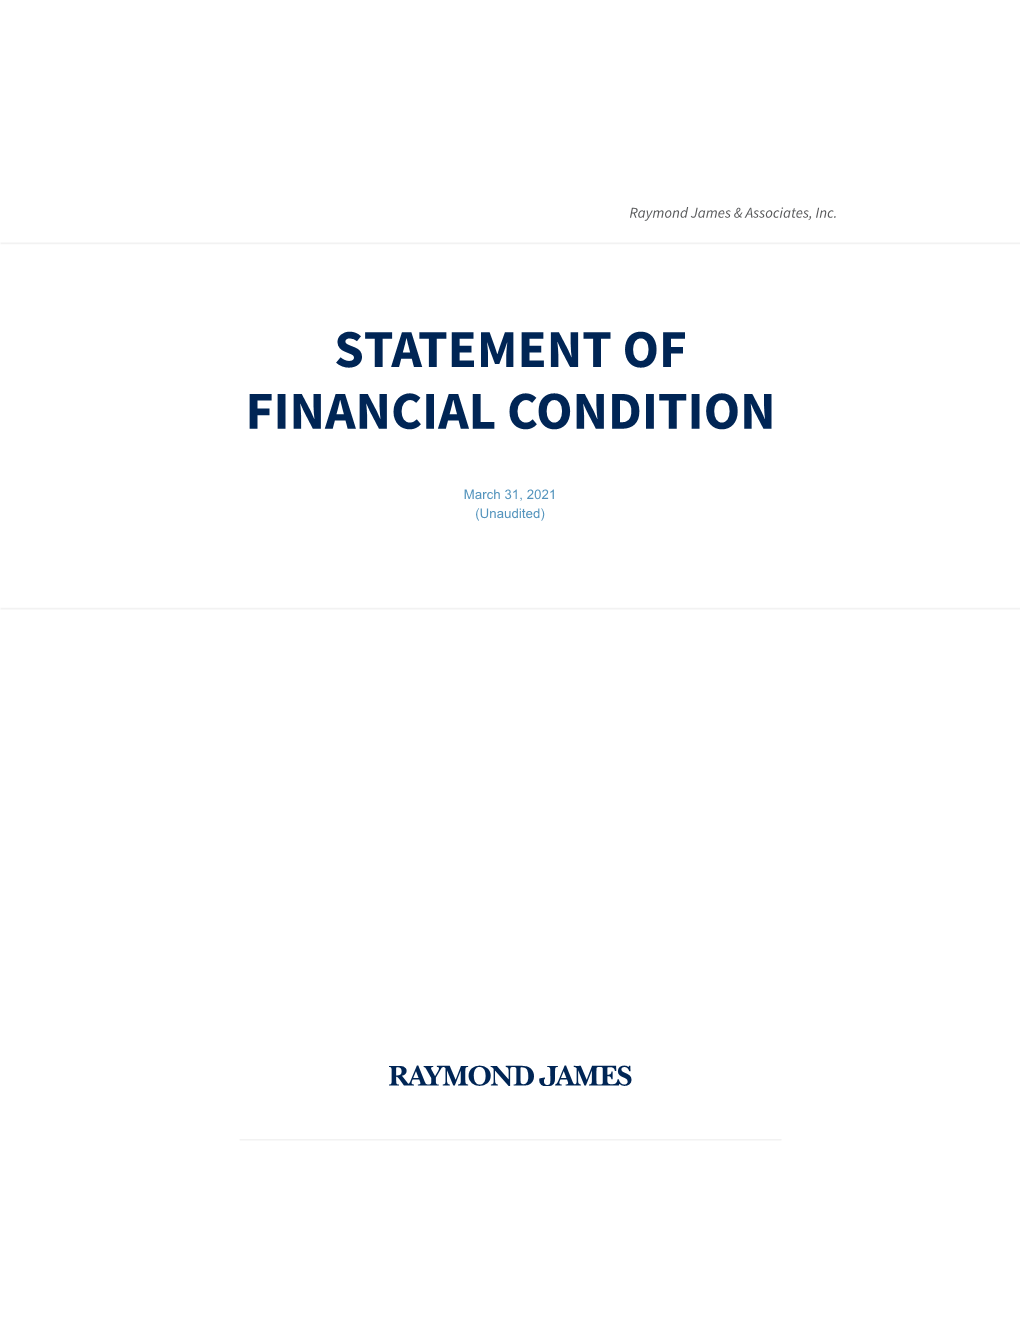 Statement of Financial Condition